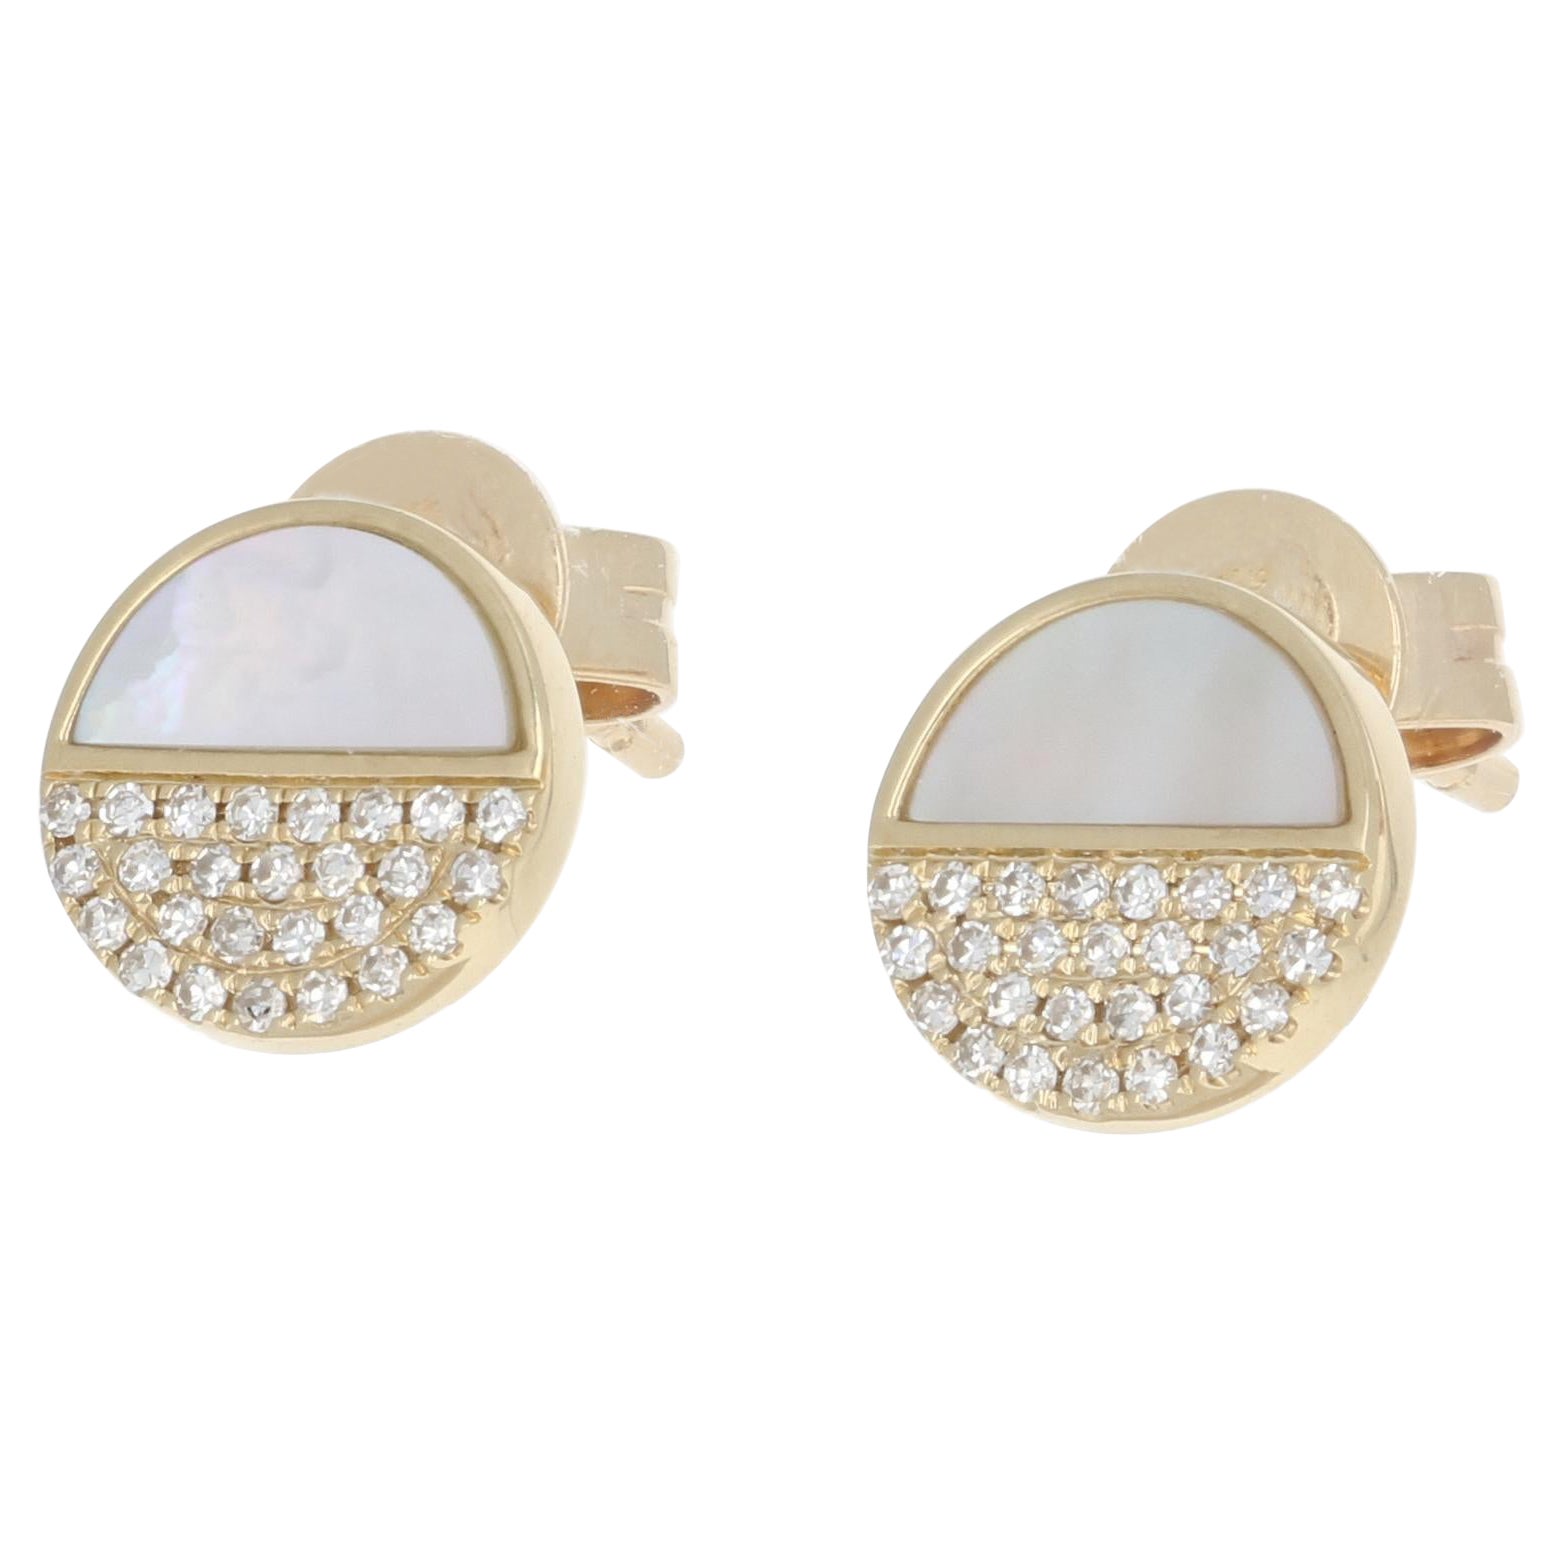 New Mother of Pearl & Diamond Circle Earrings, 14k Gold Pierced Studs .12ctw